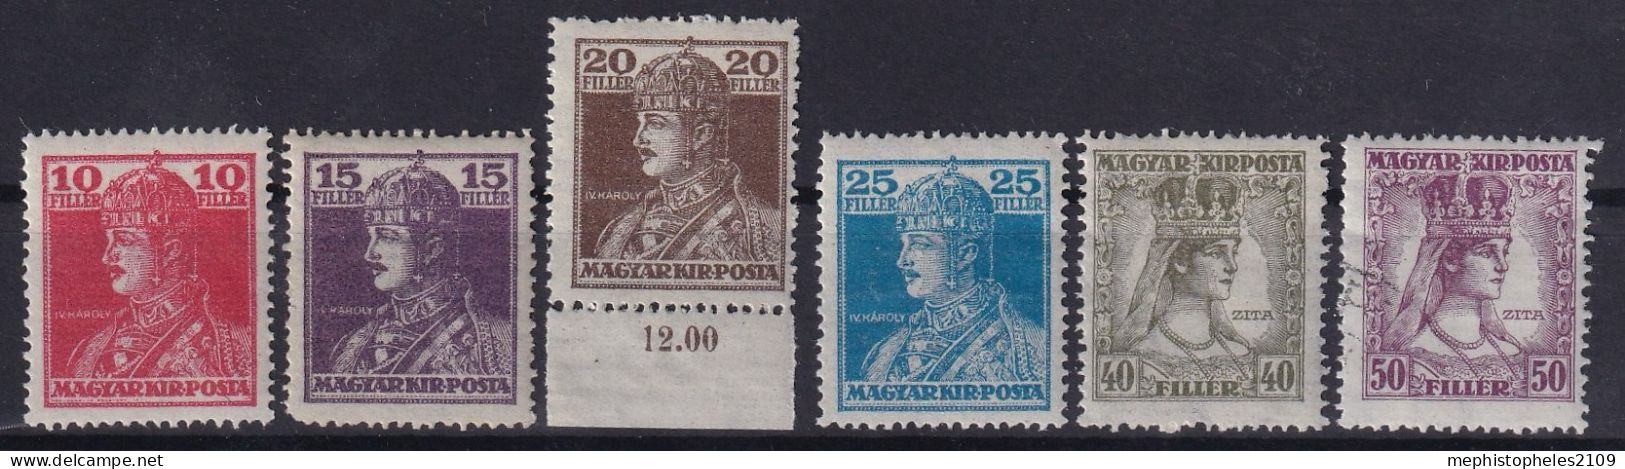 HUNGARY 1918 - MNH - Sc# 127-132 - Complete Set! - Unused Stamps